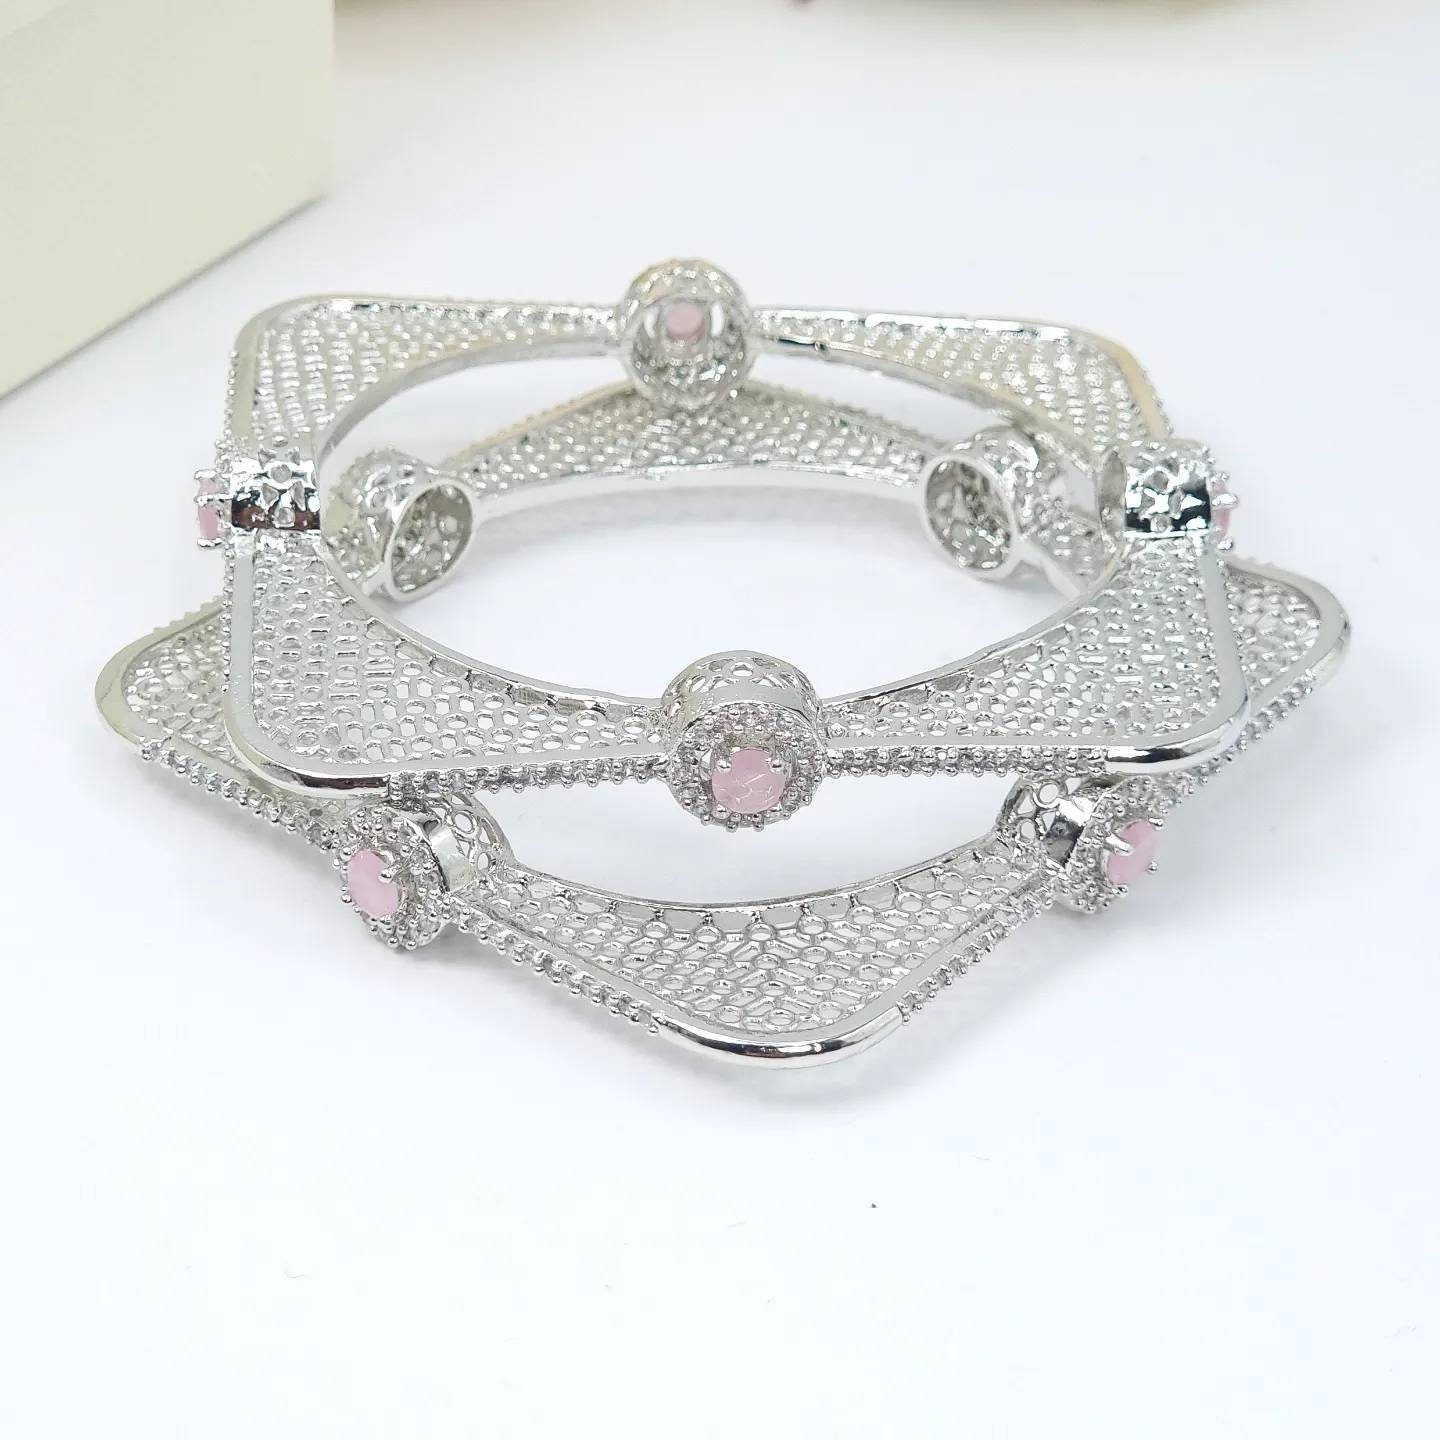 Stackable Pave White Cubic Cz Stainless Steel Bangle Thin 